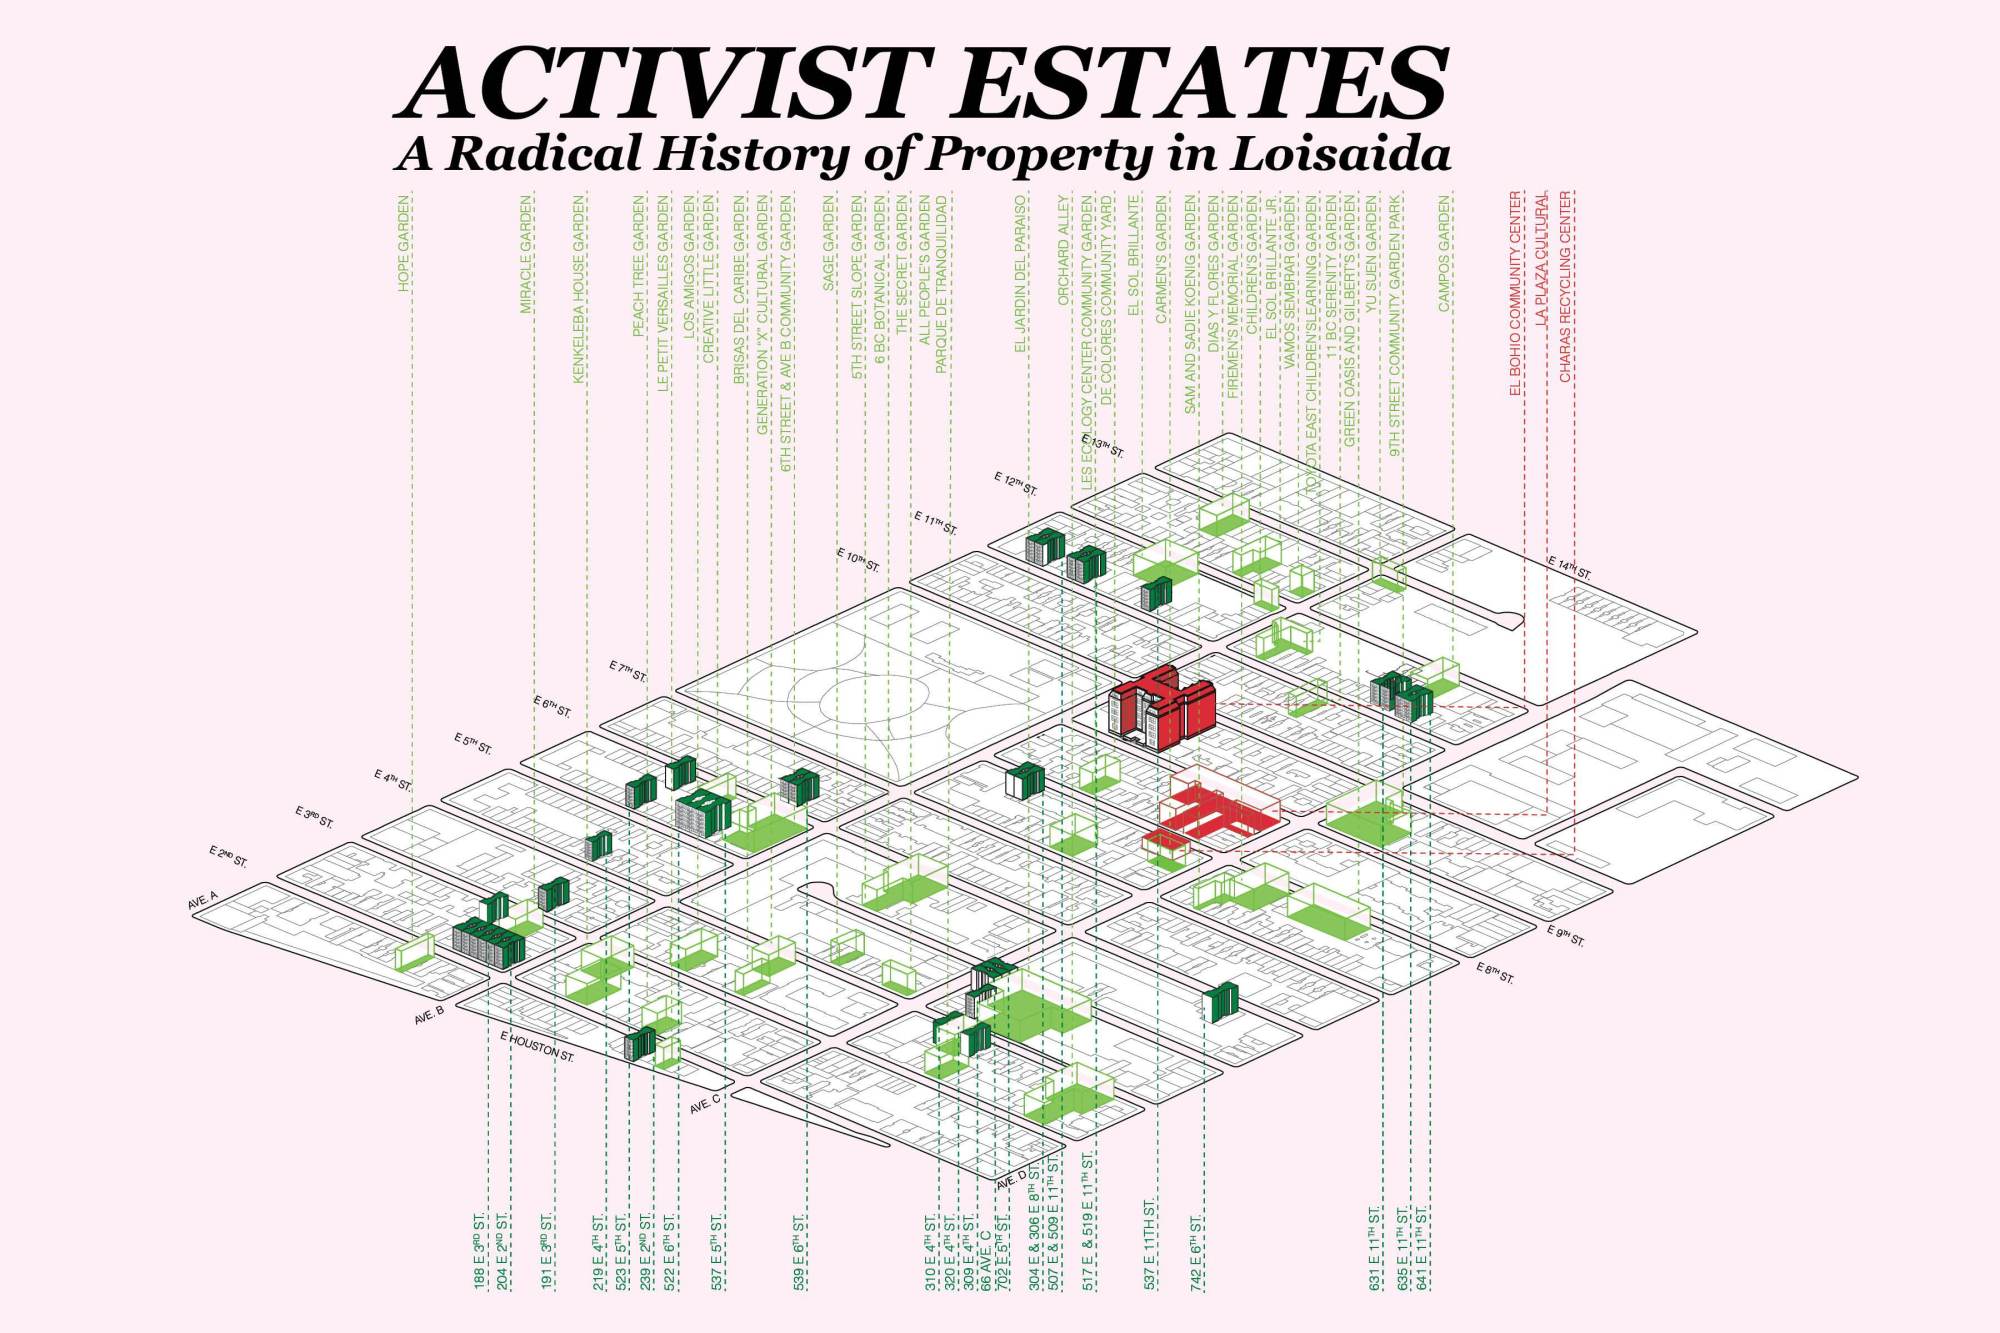 Activist Estates: A Radical History of Property in Loisaida (Exhibit Opening Reception)